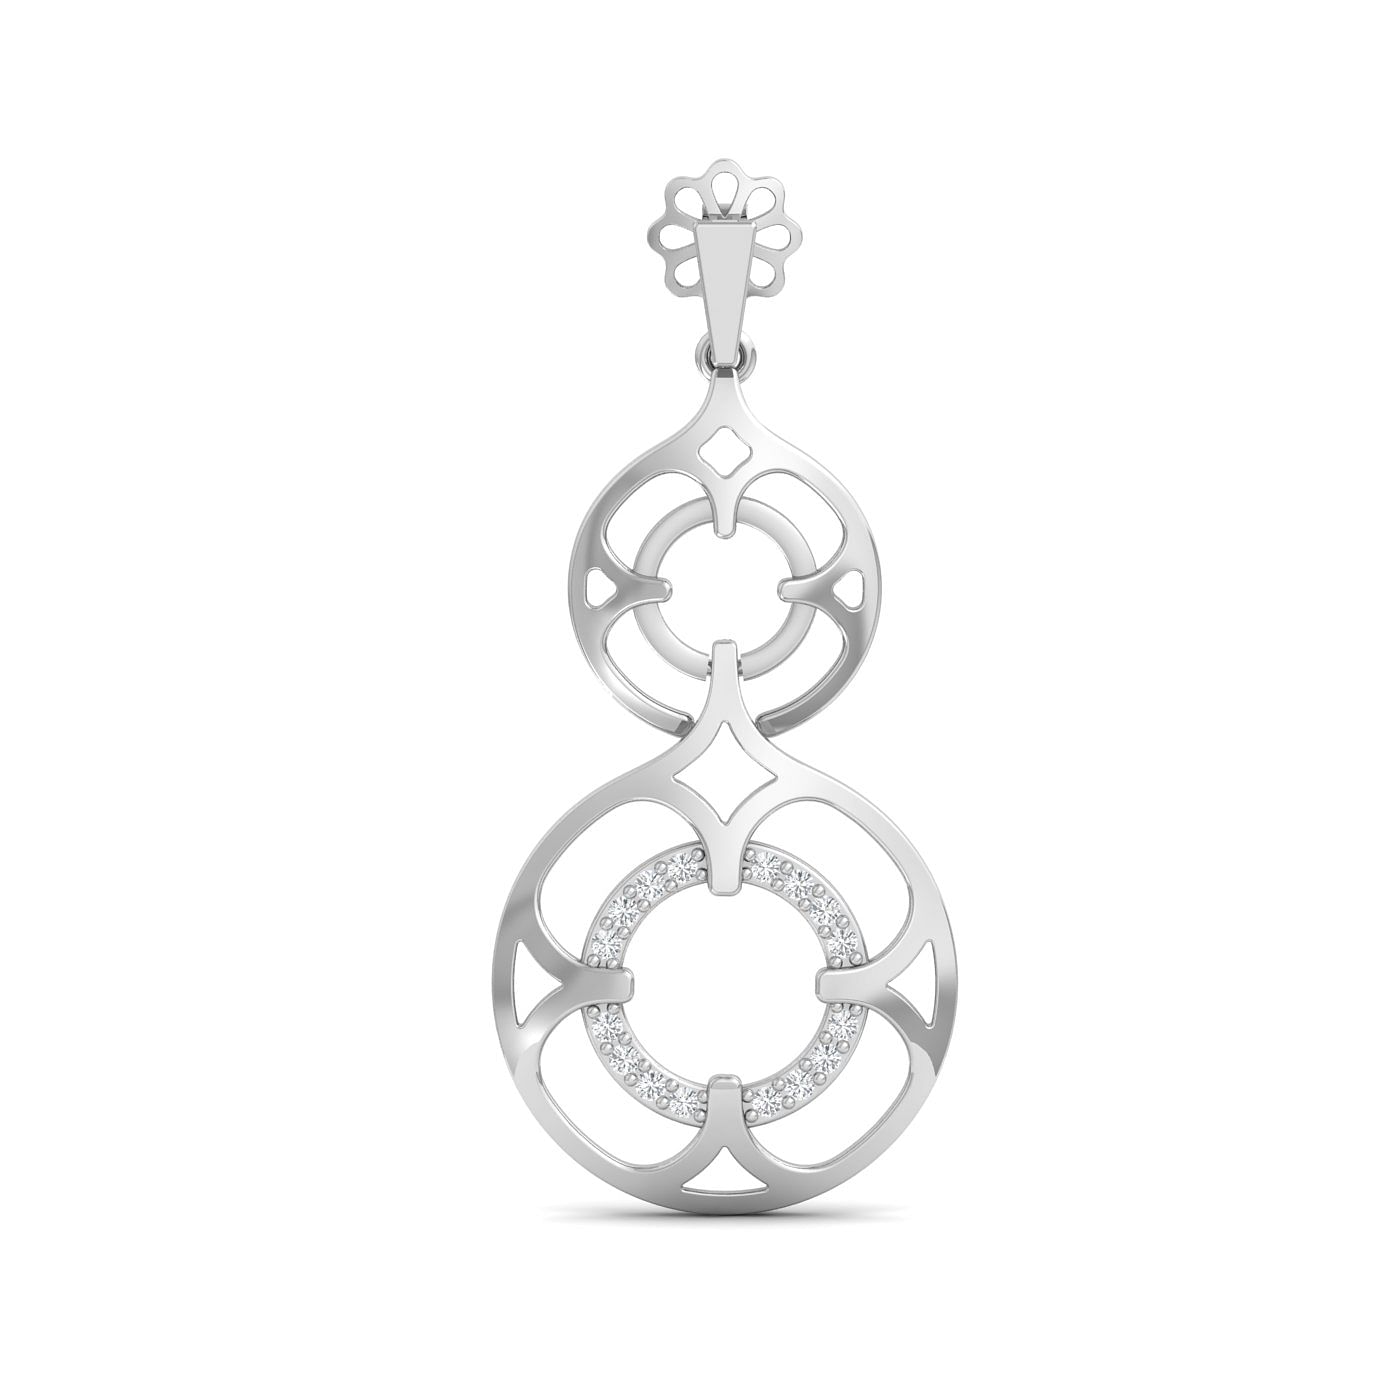 floral style white gold diamond drop earring